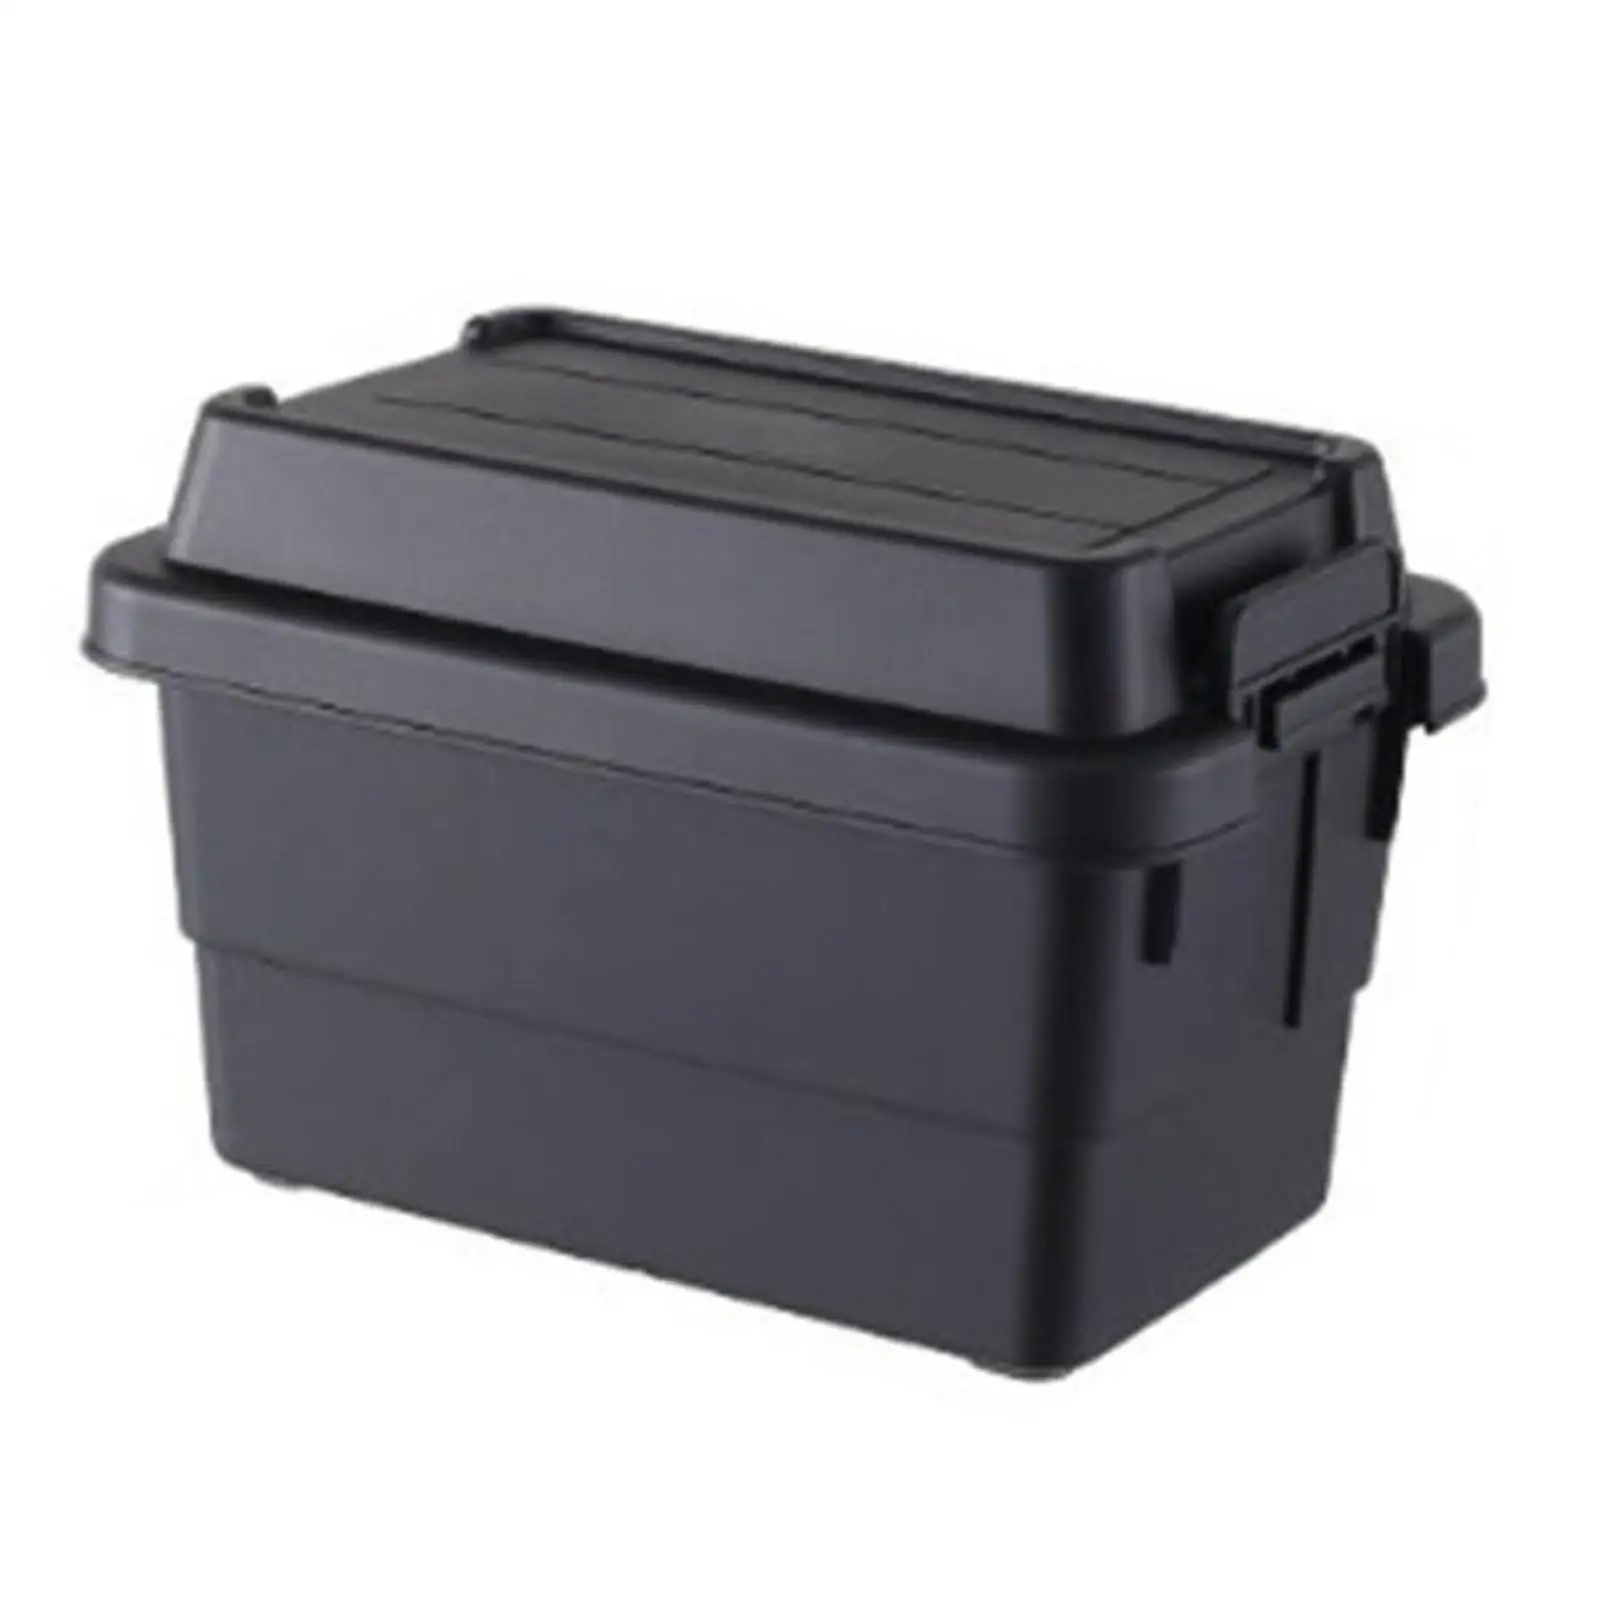 Camping Storage Box Durable Storage Bin with Latching Lid Small Storage